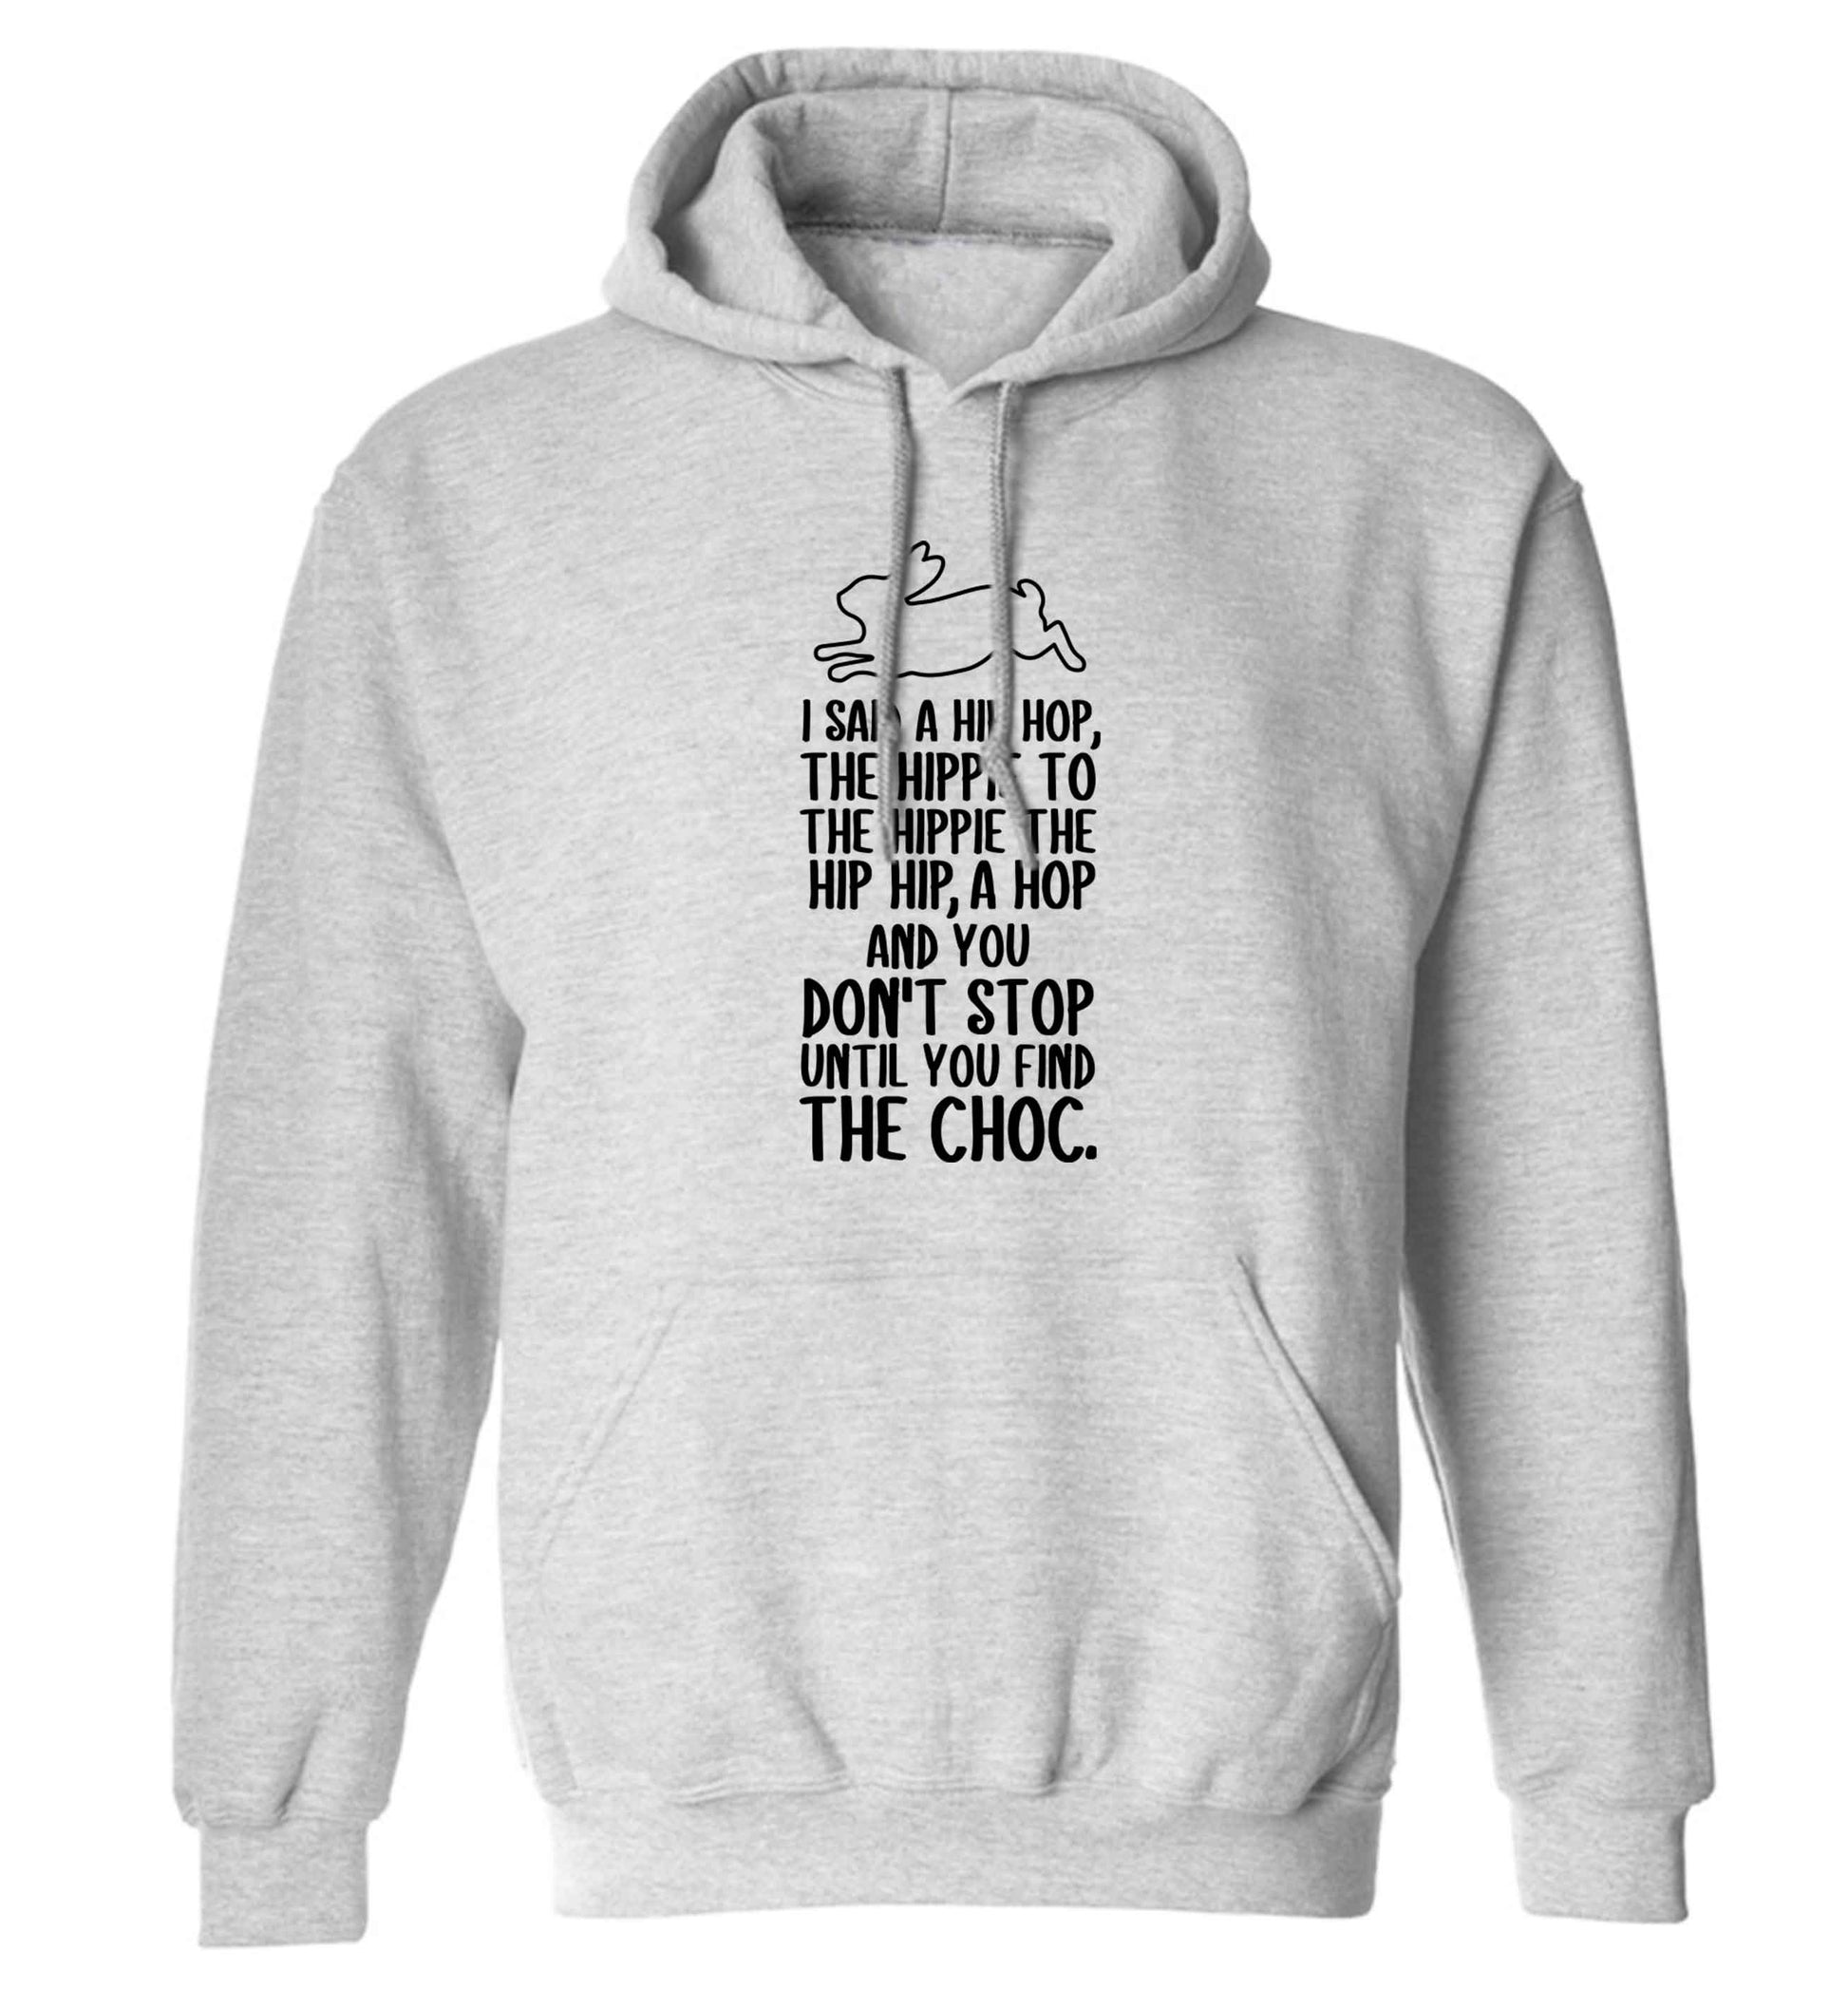 Don't stop until you find the choc adults unisex grey hoodie 2XL